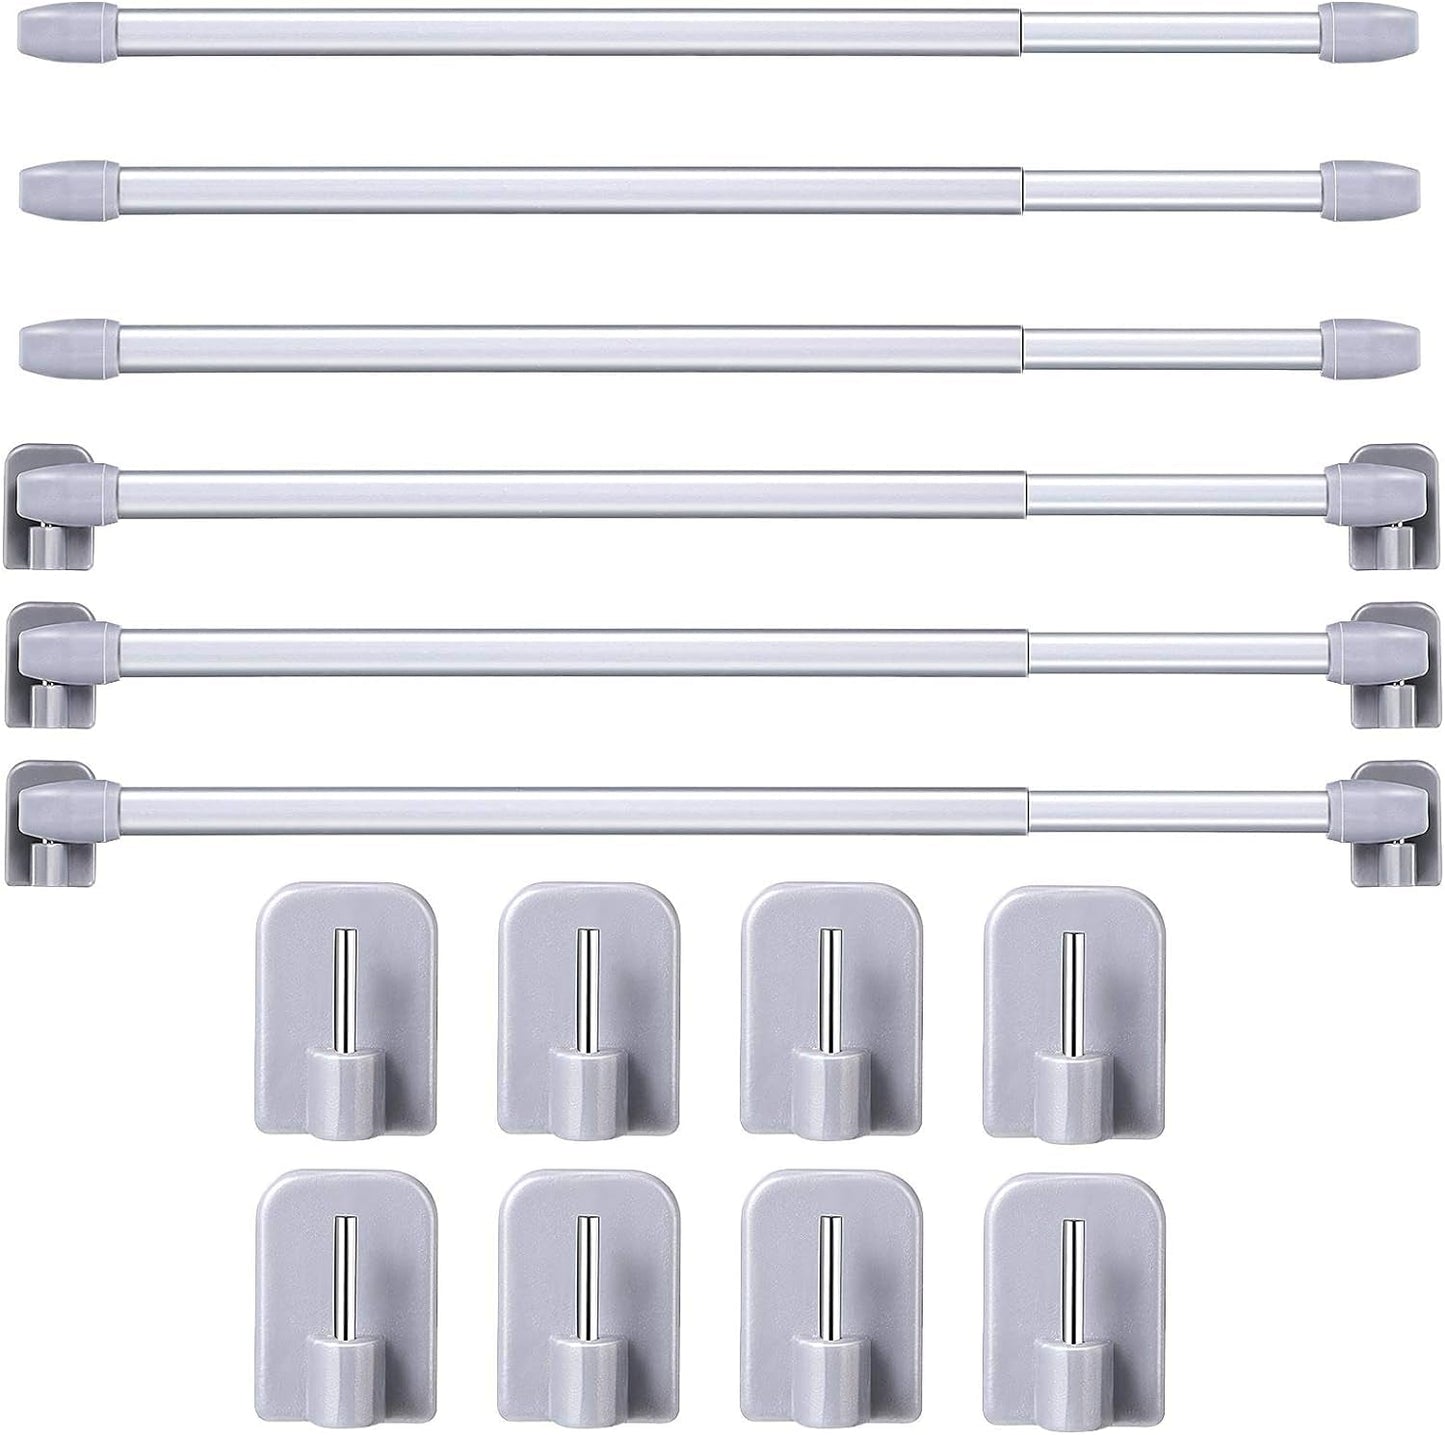 Adjustable Plastic Curtain Rod 15.7-27.5 Inch Self Adhesive Shower Curtain Rods for Window Cupboard Bars Tension Rods Drill Less Curtain Accessories for Home Bathroom Hotel(White, 2 Pieces)